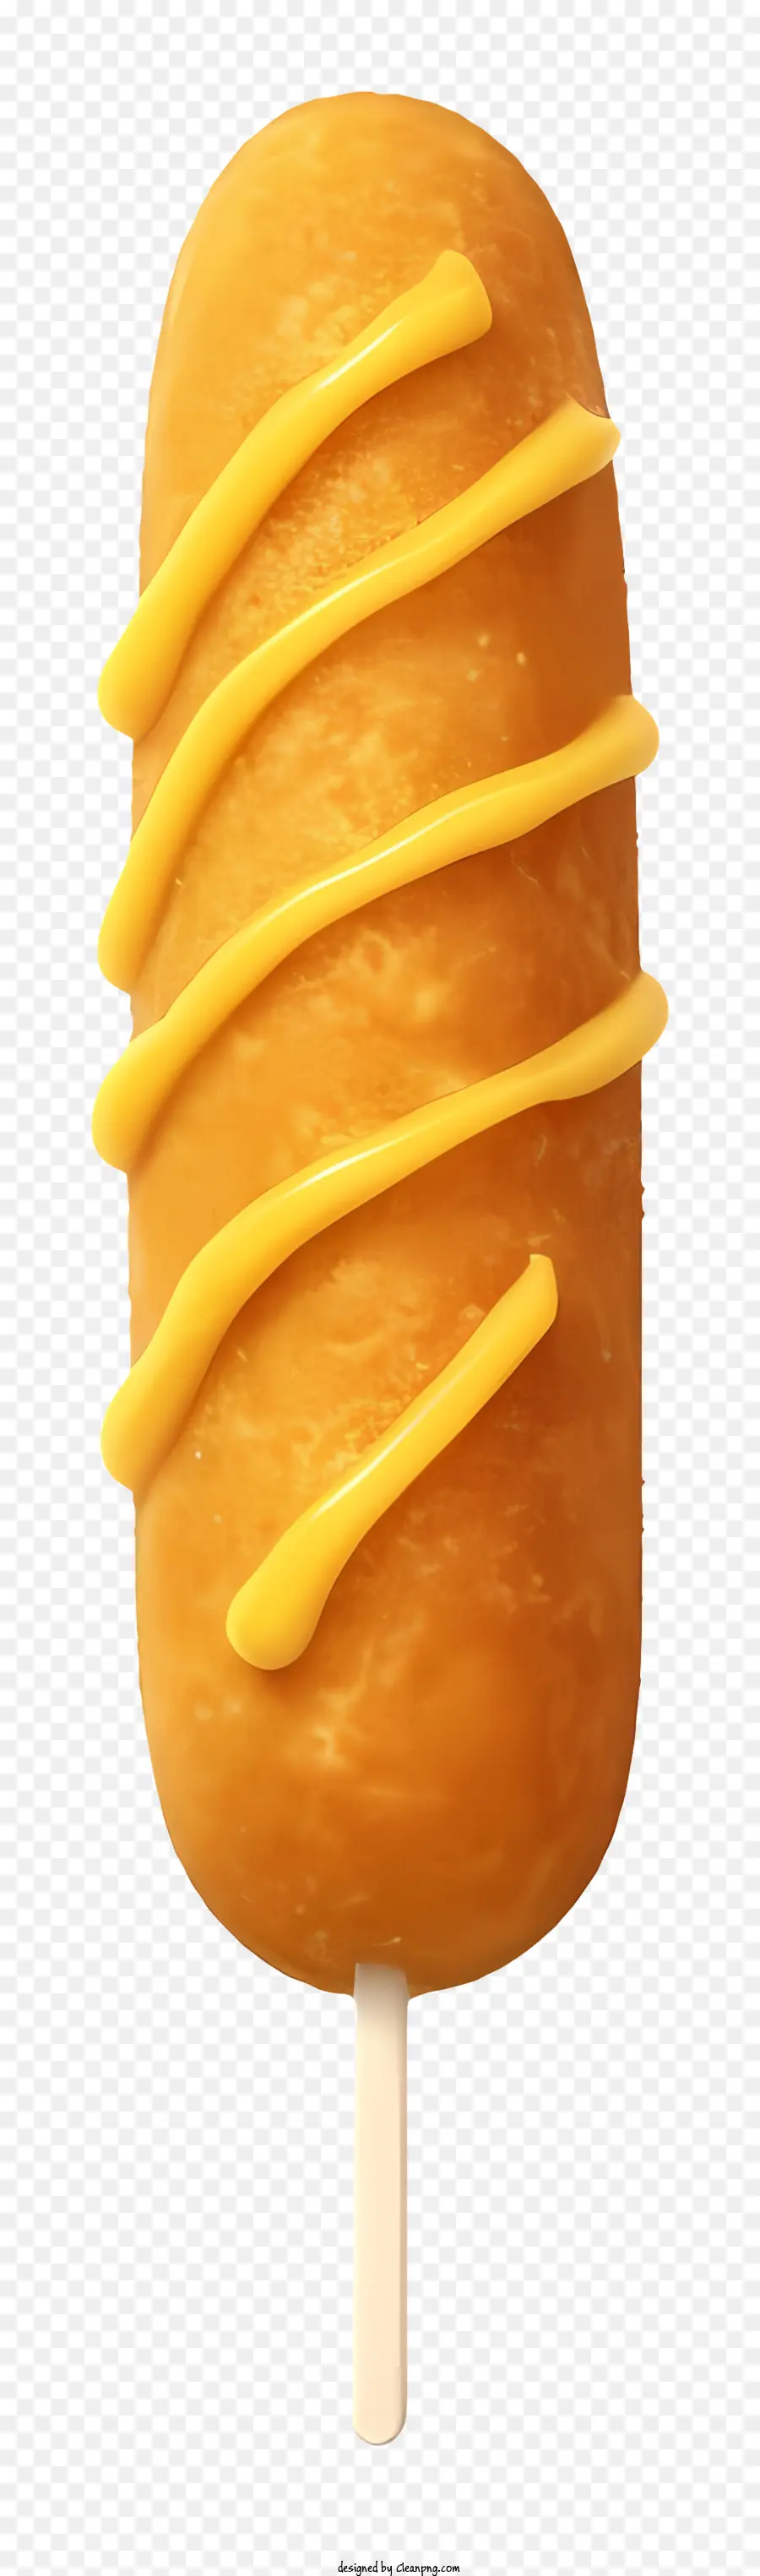 dessert on a stick yellow icing doughy pastry cake-like appearance yellow viscous substance